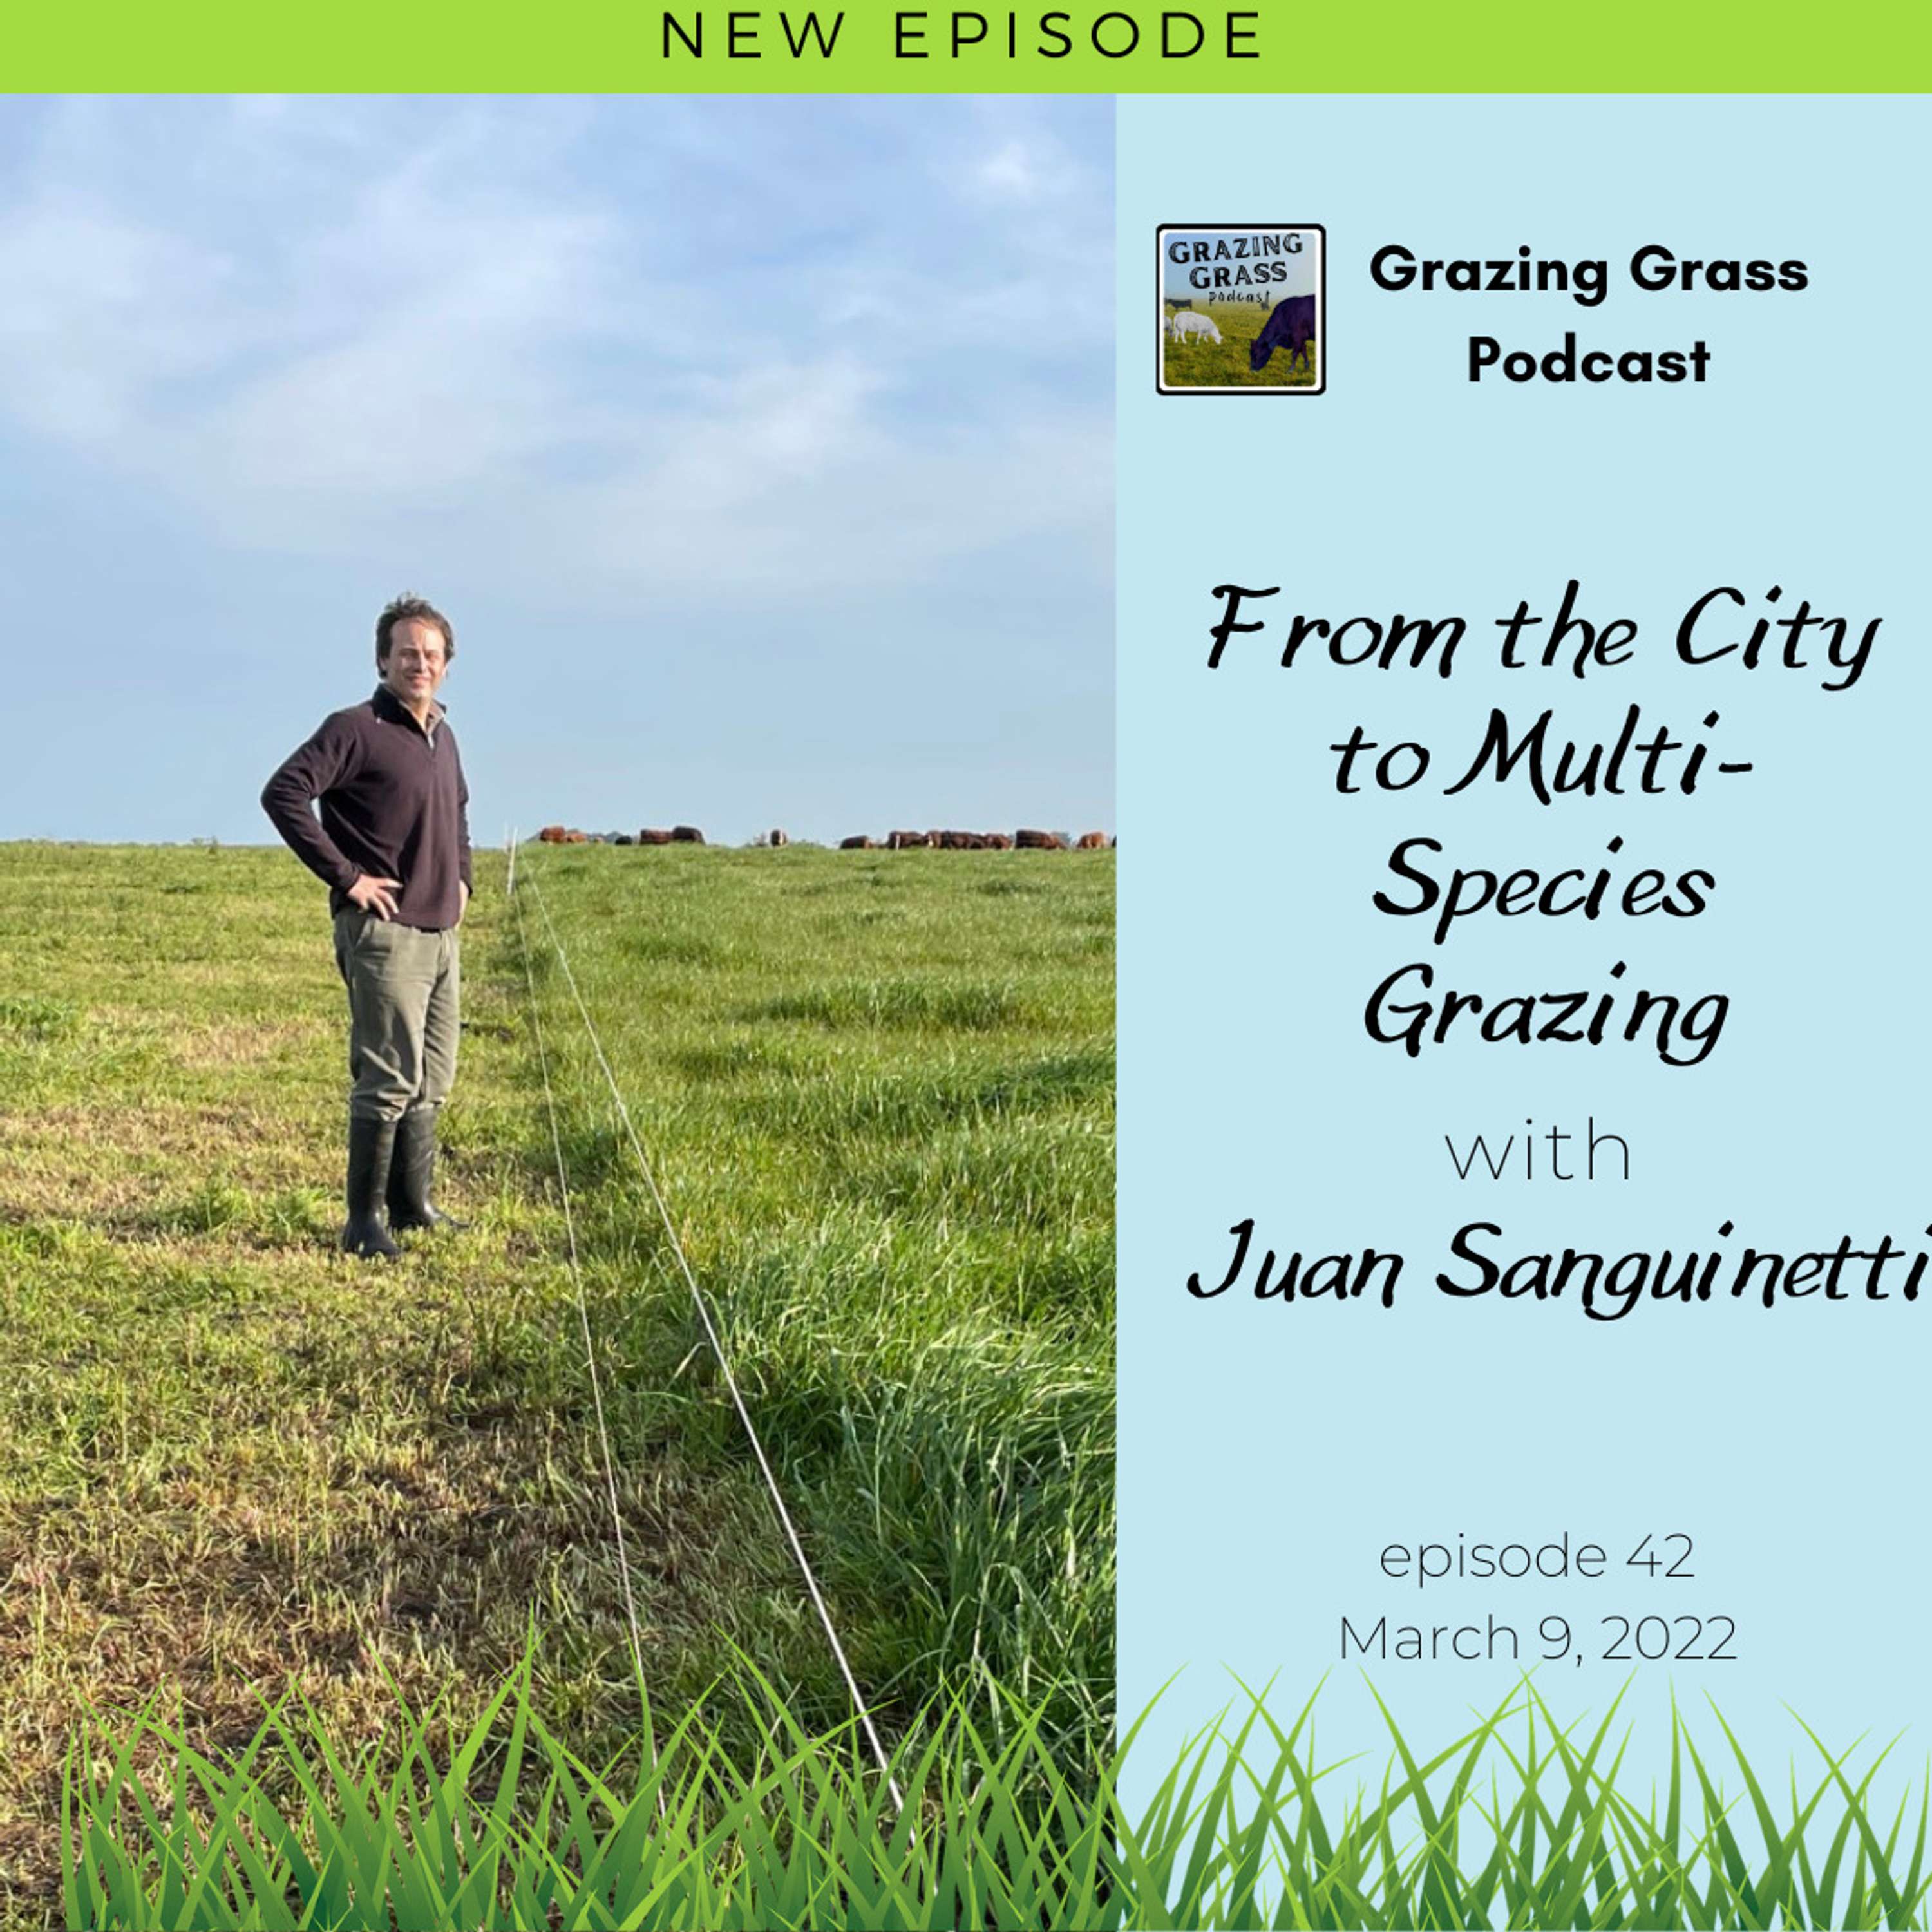 e42. From the City to Multi-Species Grazing with Juan Sanguinetti